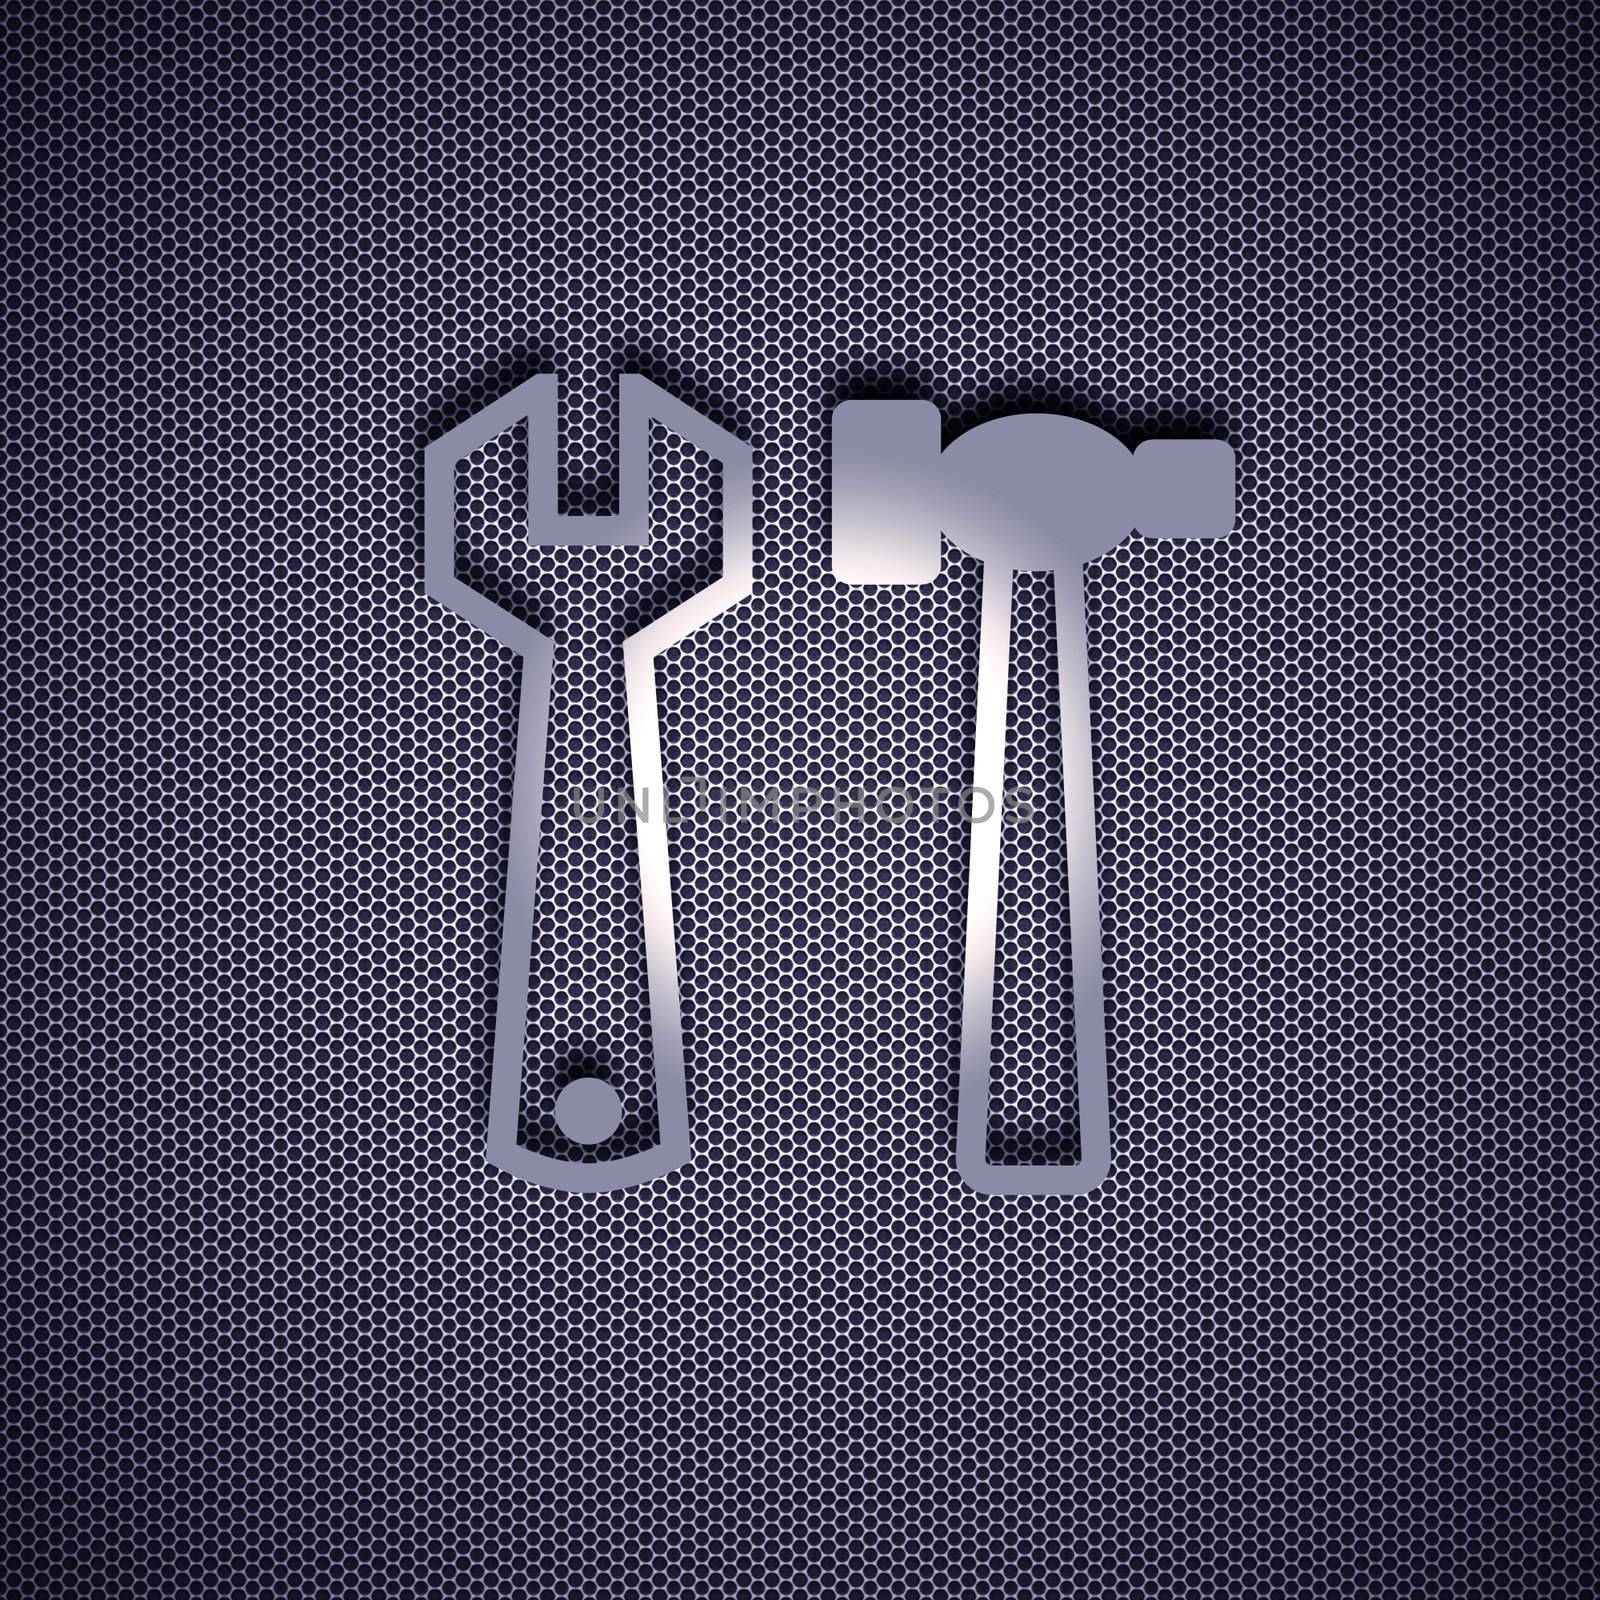 Tools icon grey by rook